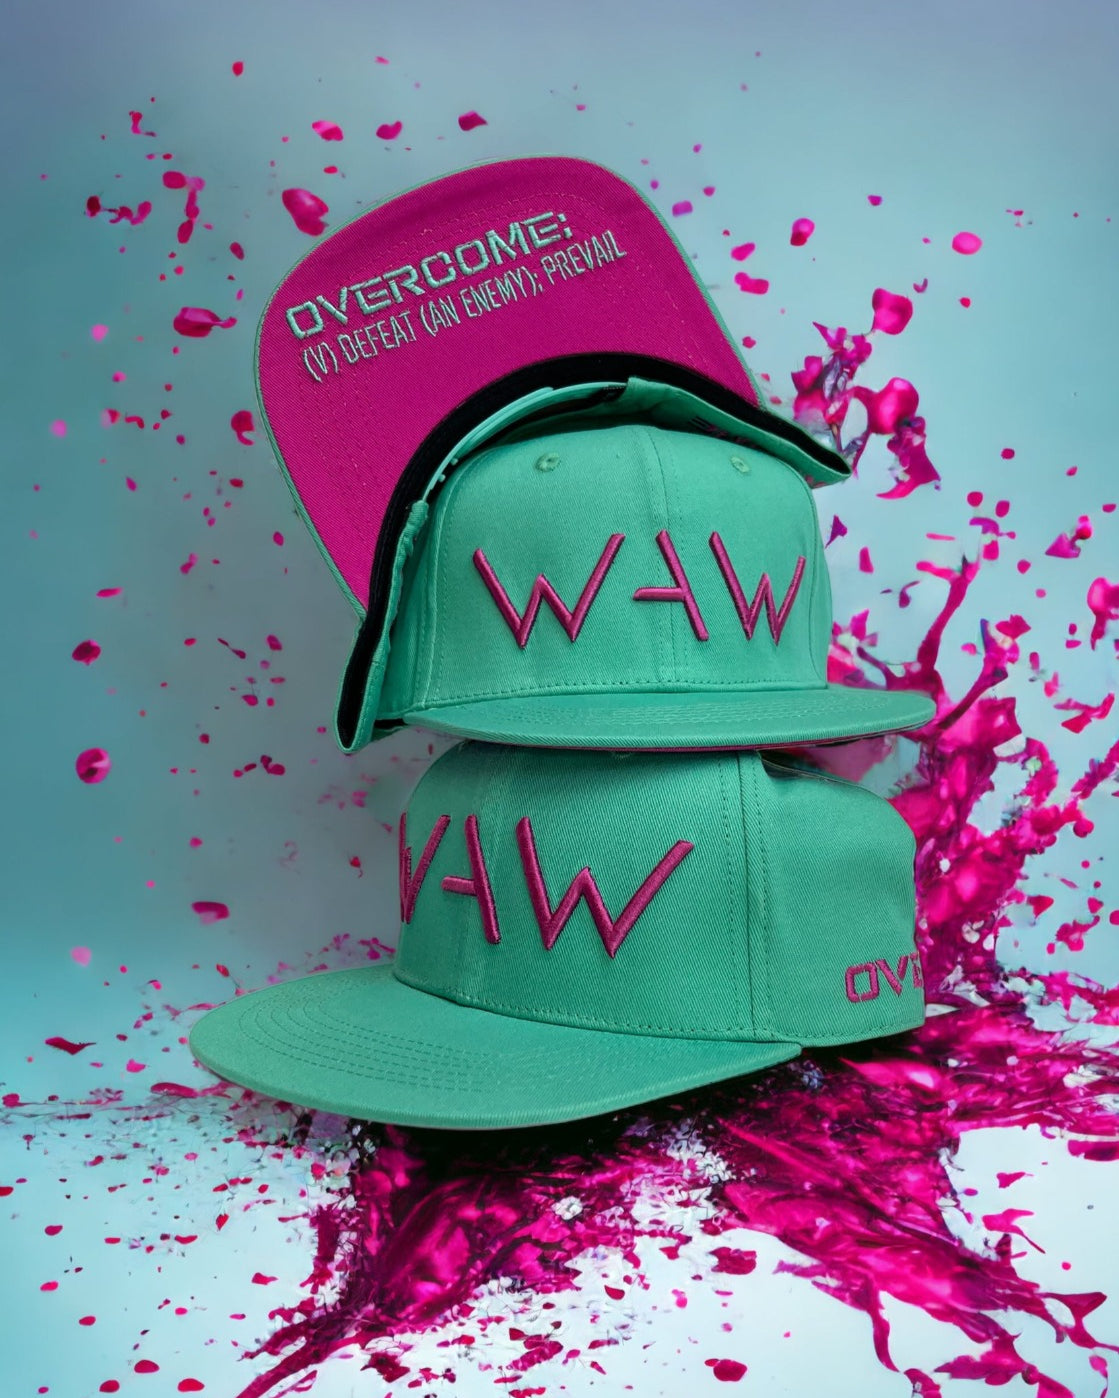 Teal and Hot Pink WAW Hat, with WAW logo and Overcome message, WeAreWarriorsApparel.com